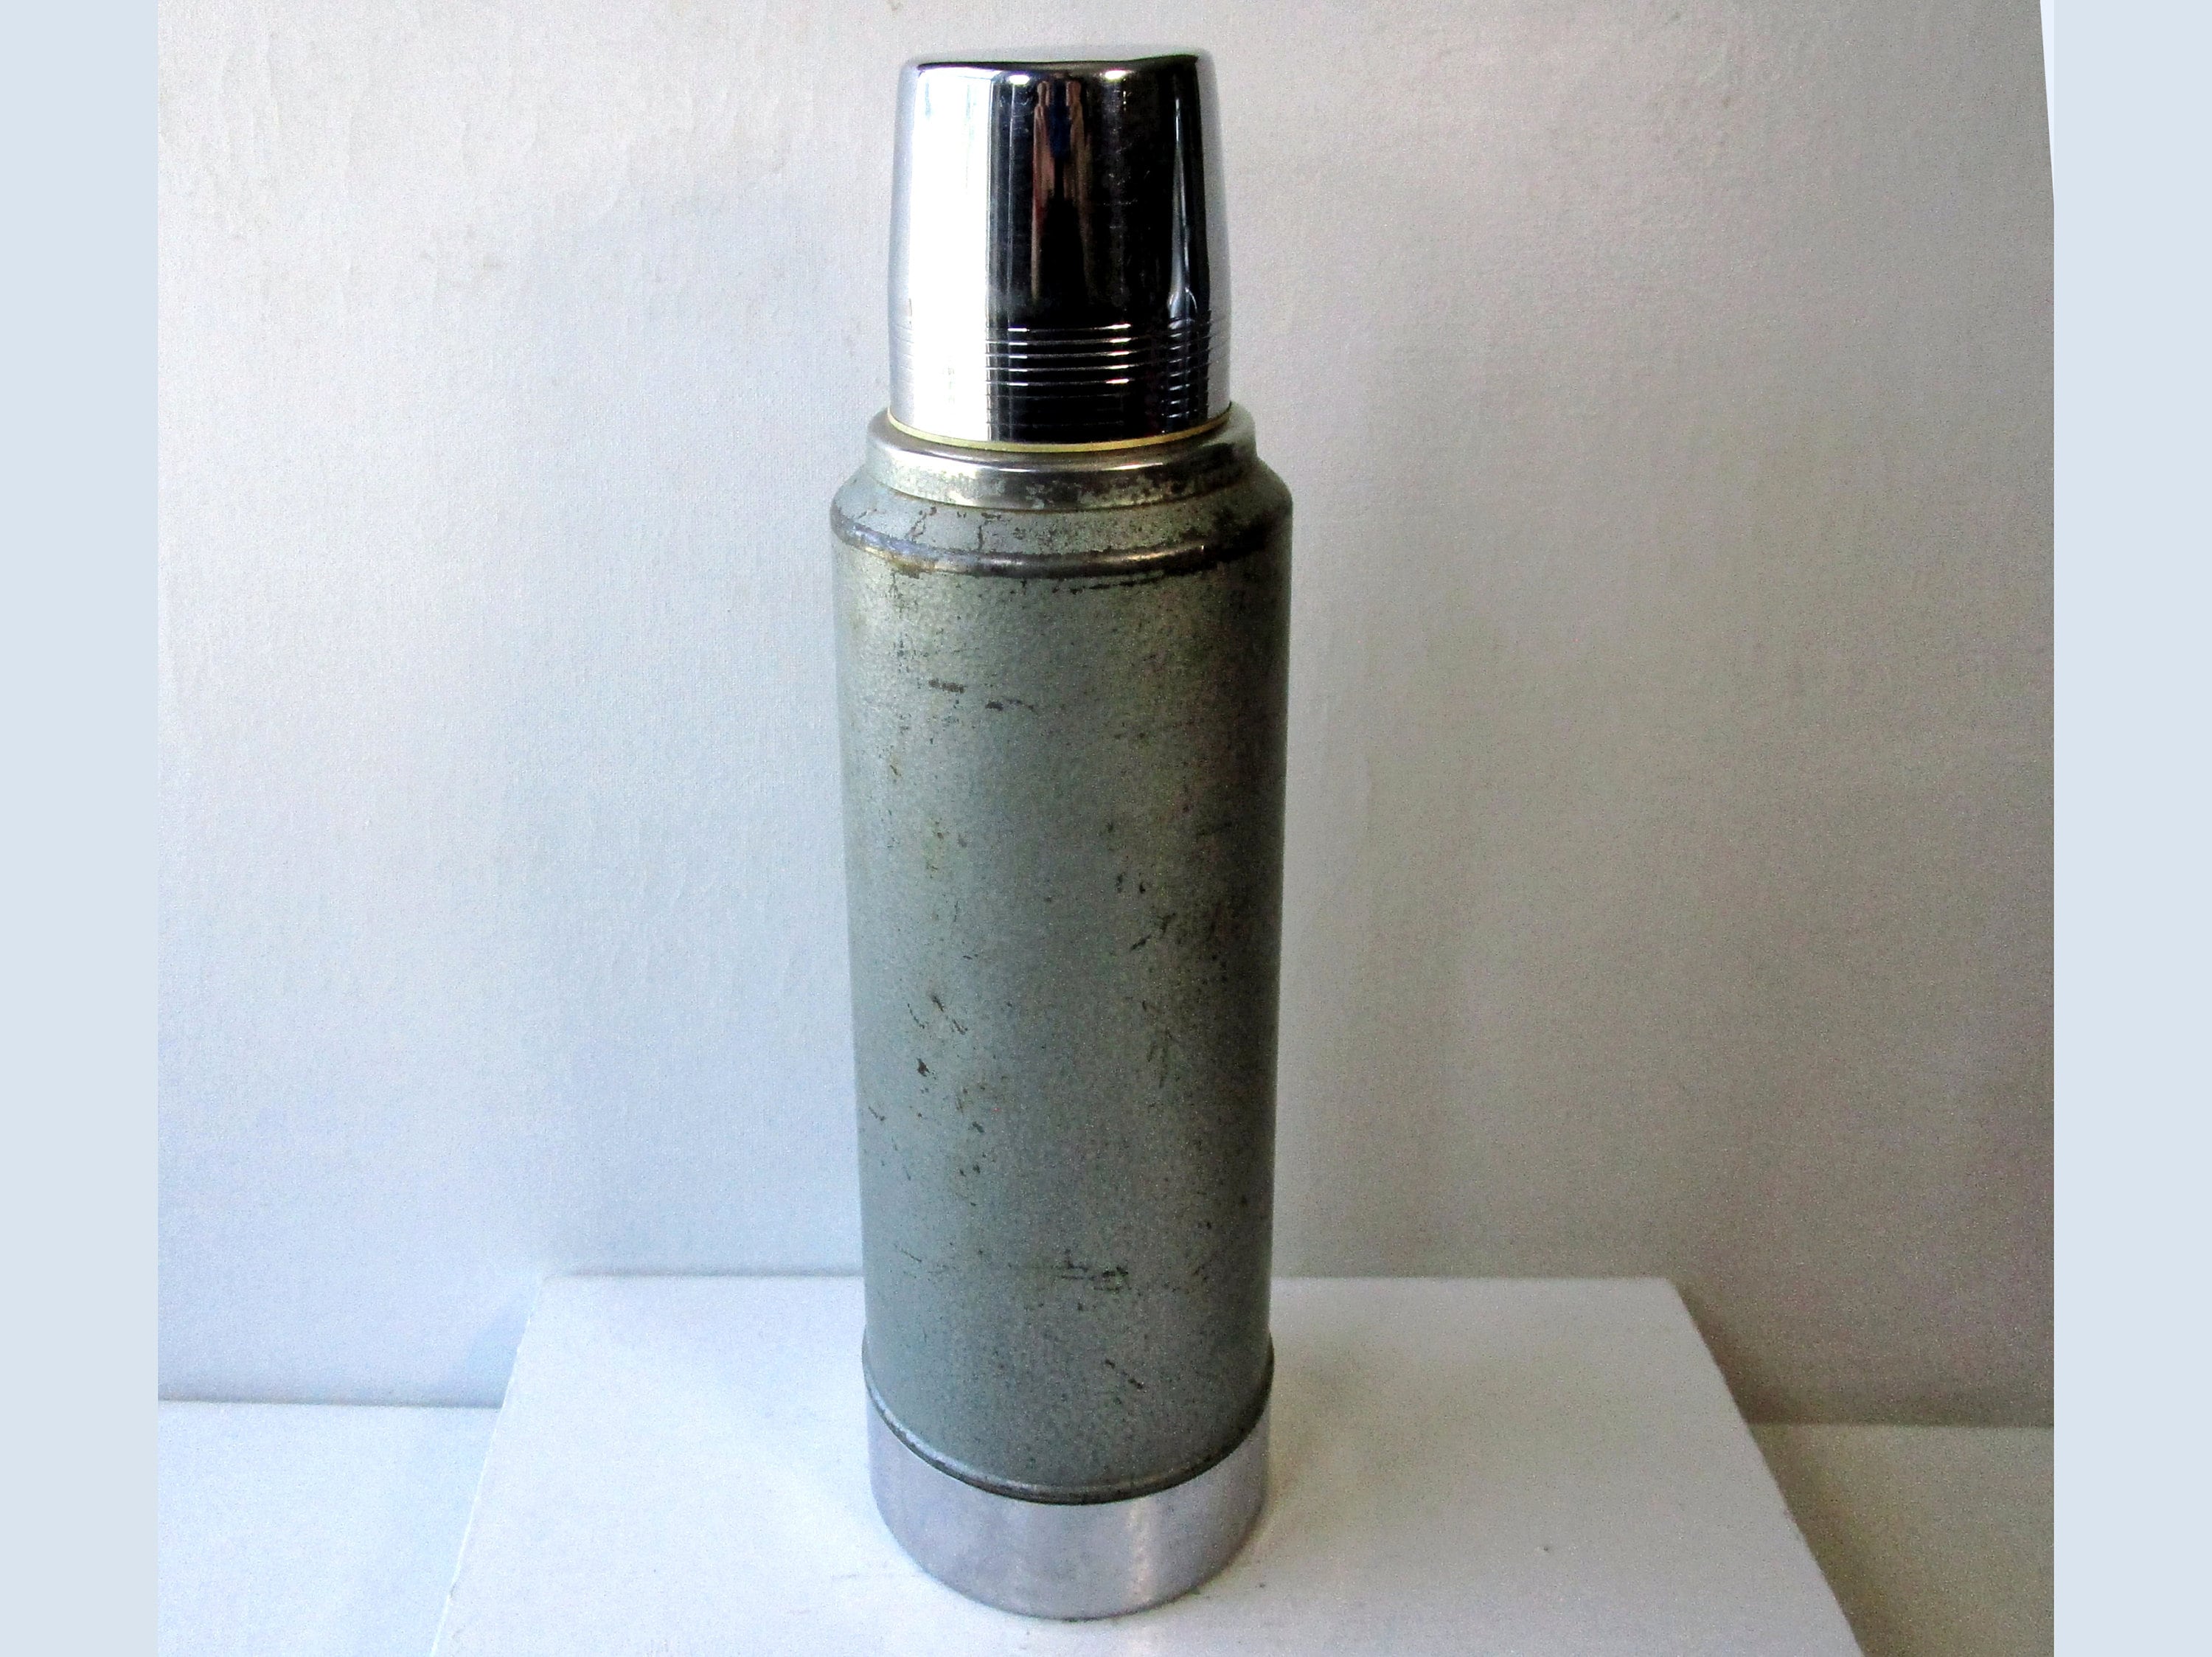 Buy the Vintage Stanley Aladdin Thermos w/ Handle